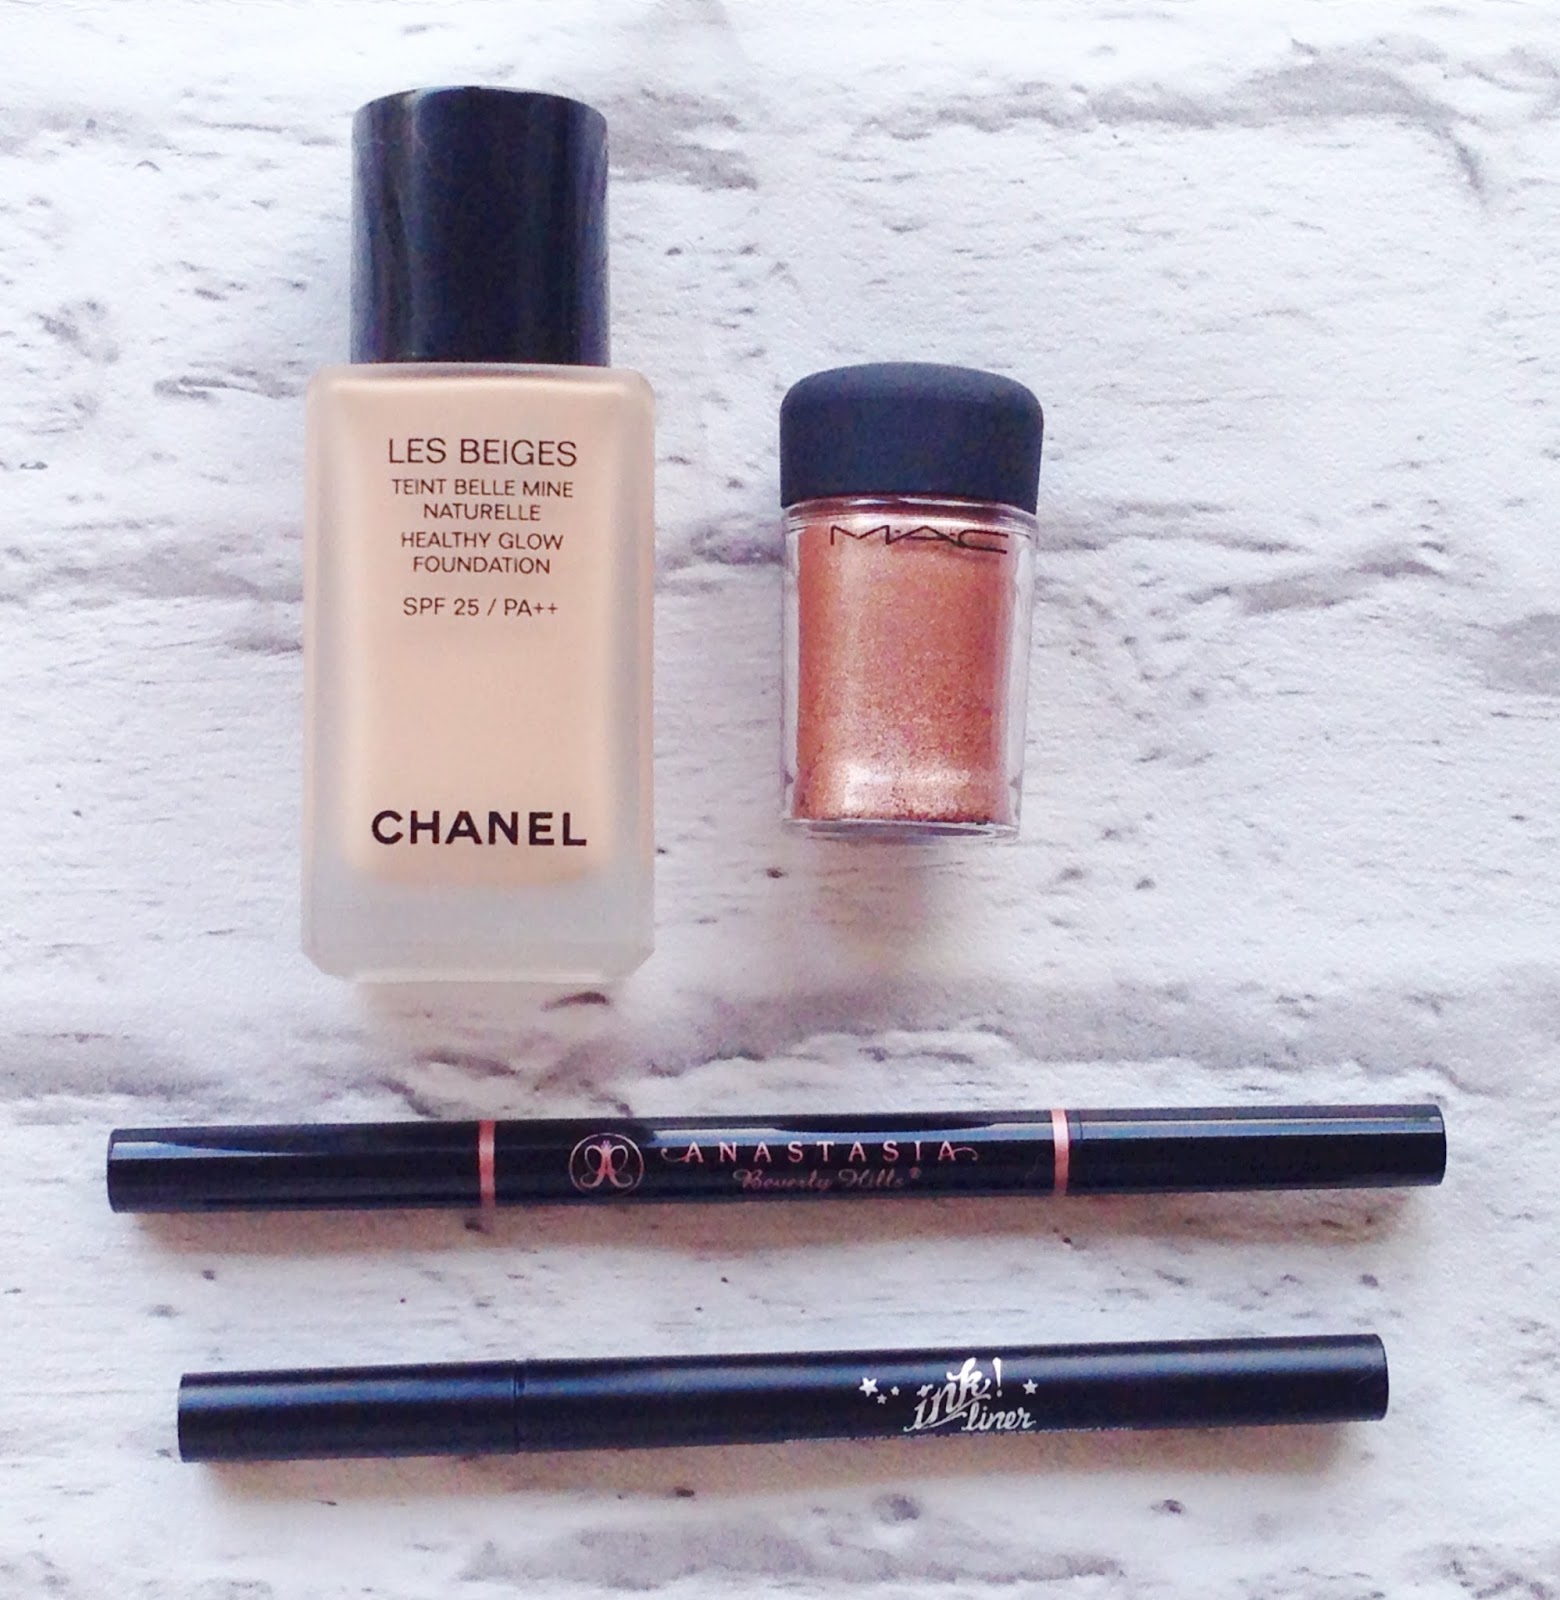 Looking flawless naturally with Chanel Les Beiges Healthy Glow Foundation